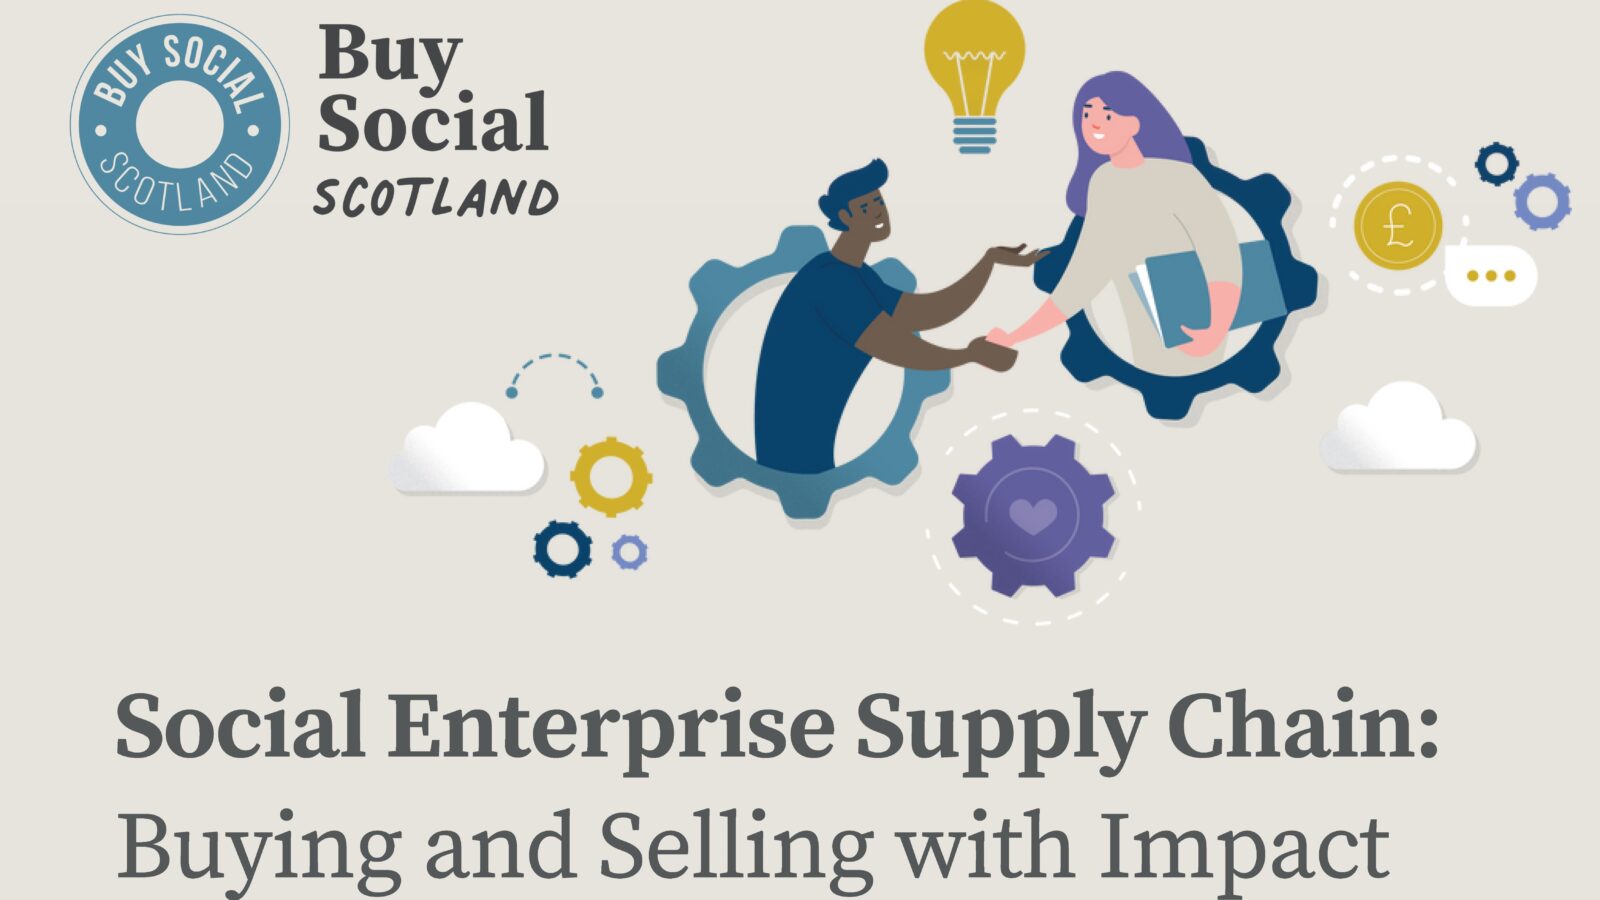 Exploring Social Procurement for your Business: Aberdeen Event Offers Insight into Responsible Purchasing